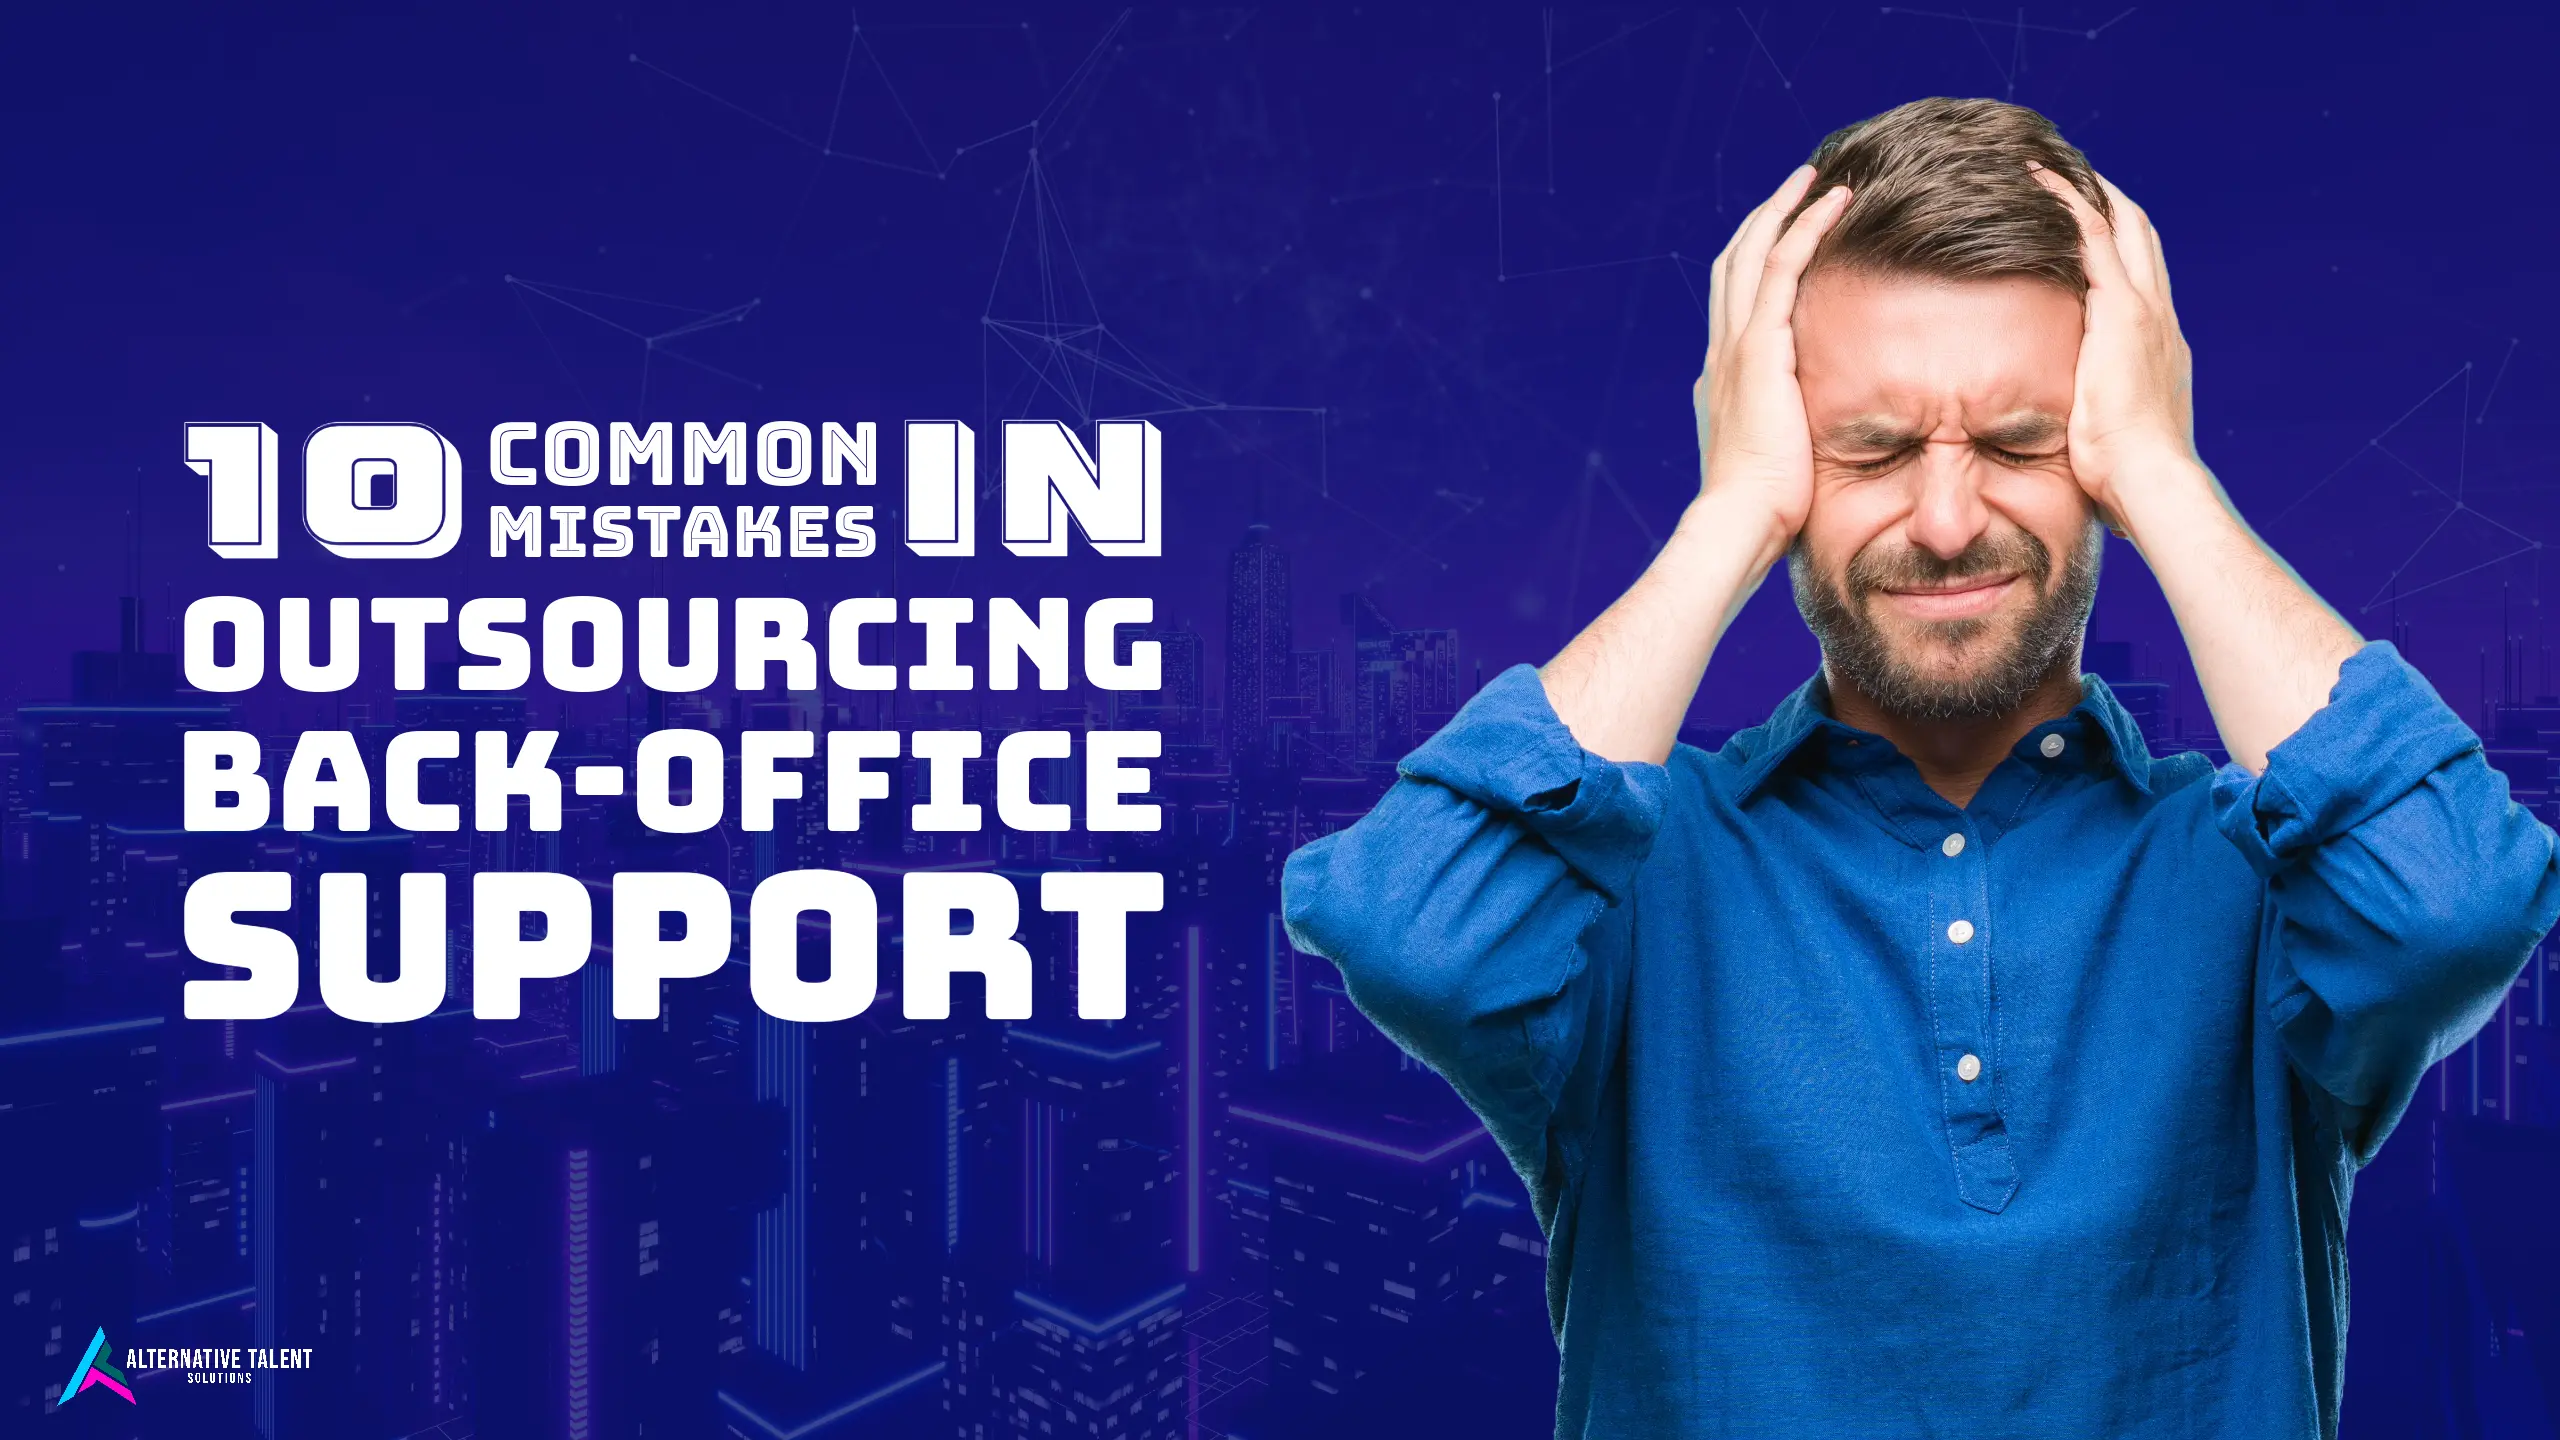 10 Common Mistakes in Outsourcing Back-Office Support